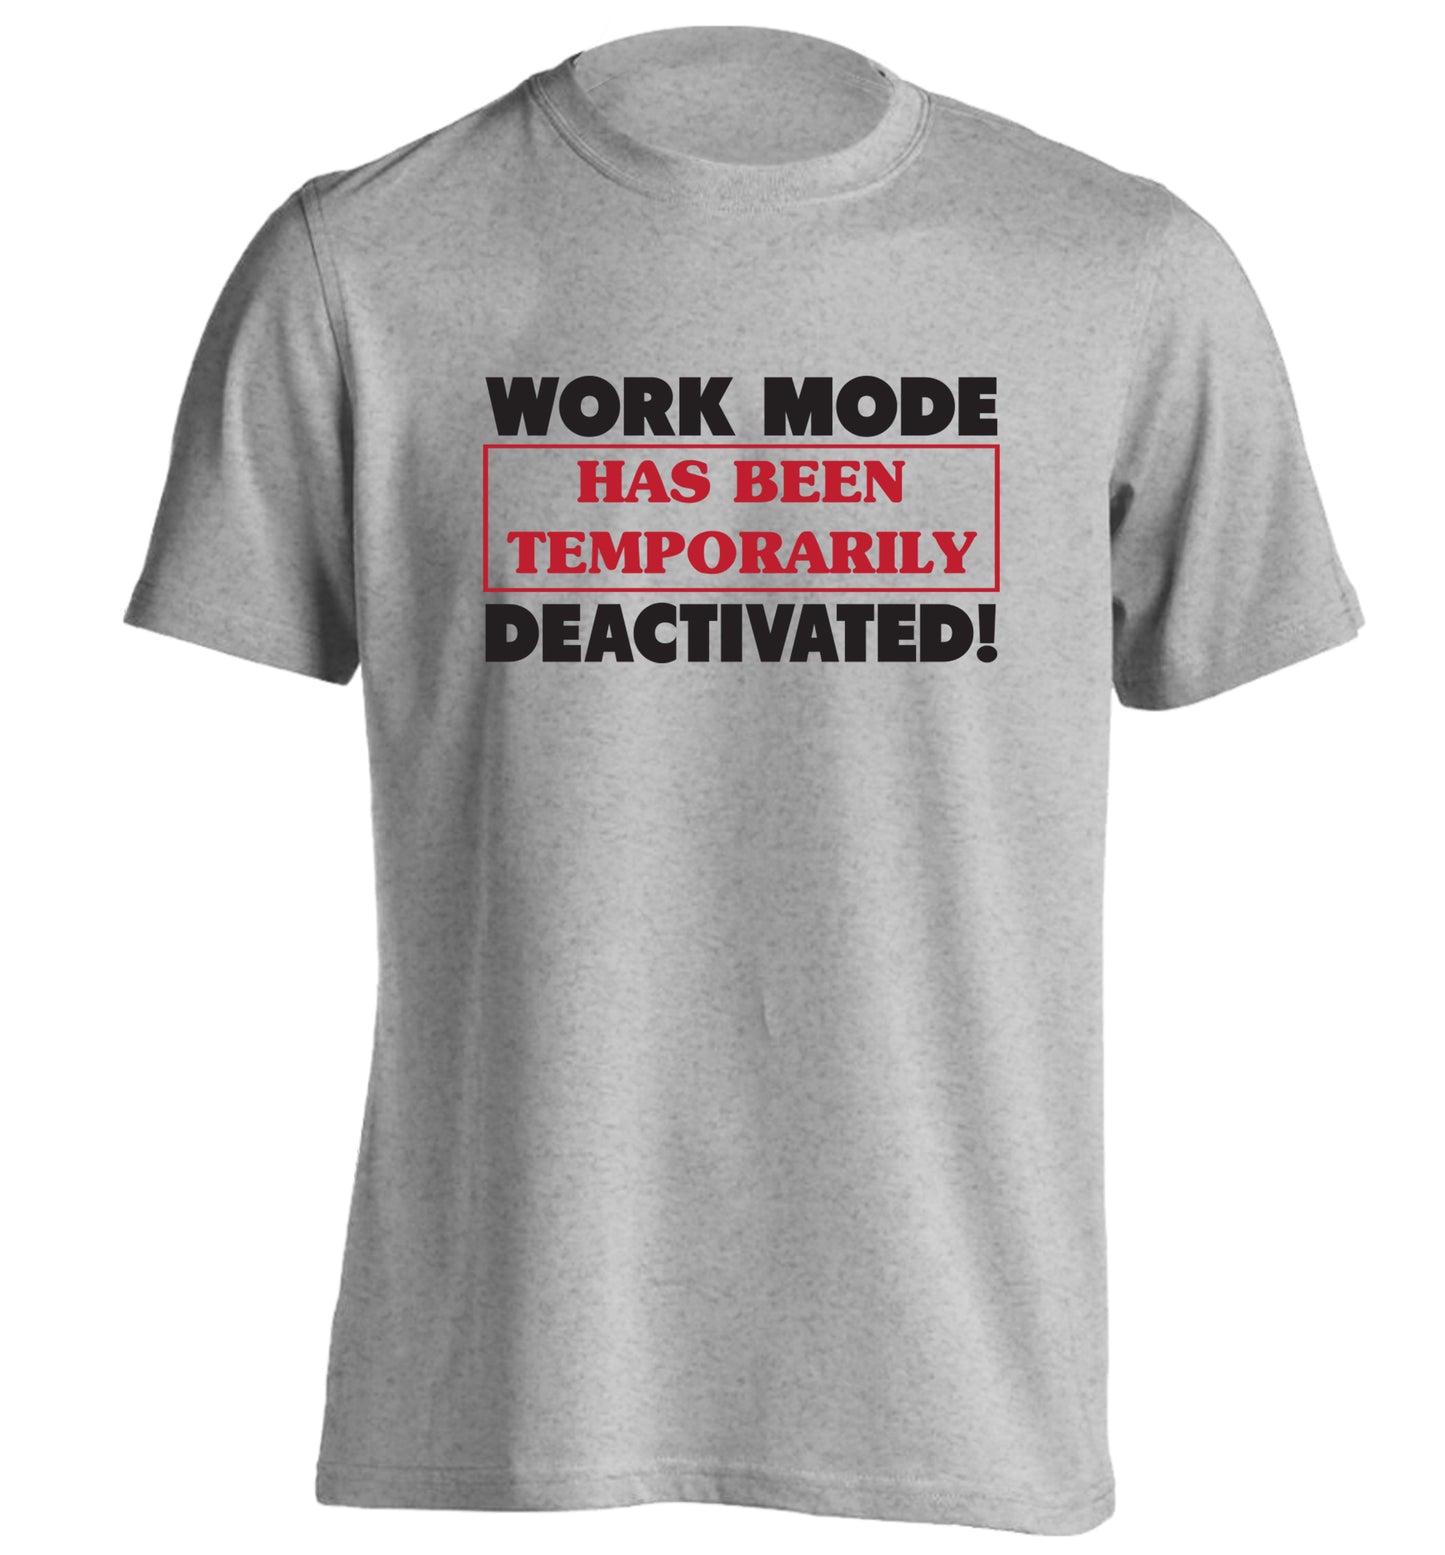 Work mode has now been temporarily deactivated adults unisex grey Tshirt 2XL